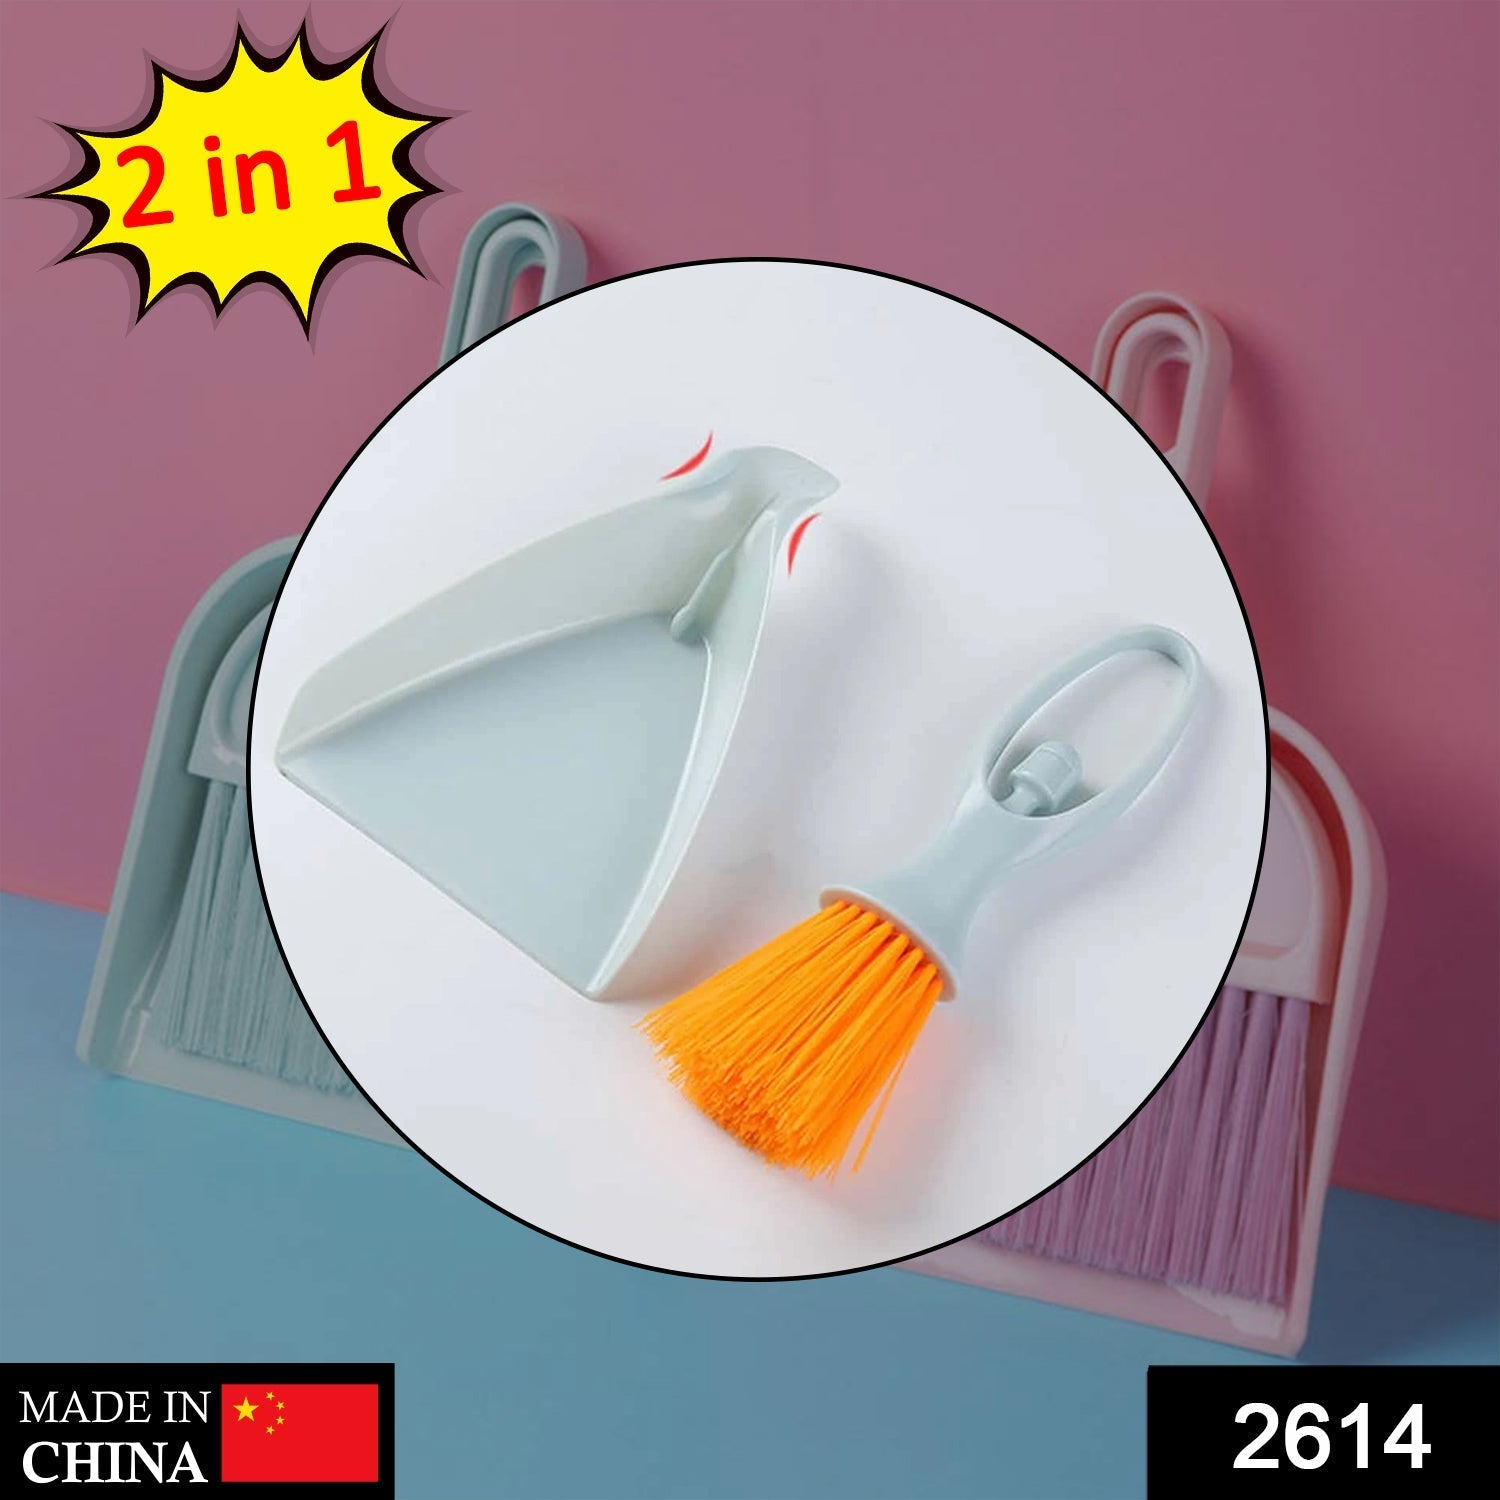 2614 Dustpan Set Used for Cleaning and removal of Dirt from floor surfaces.